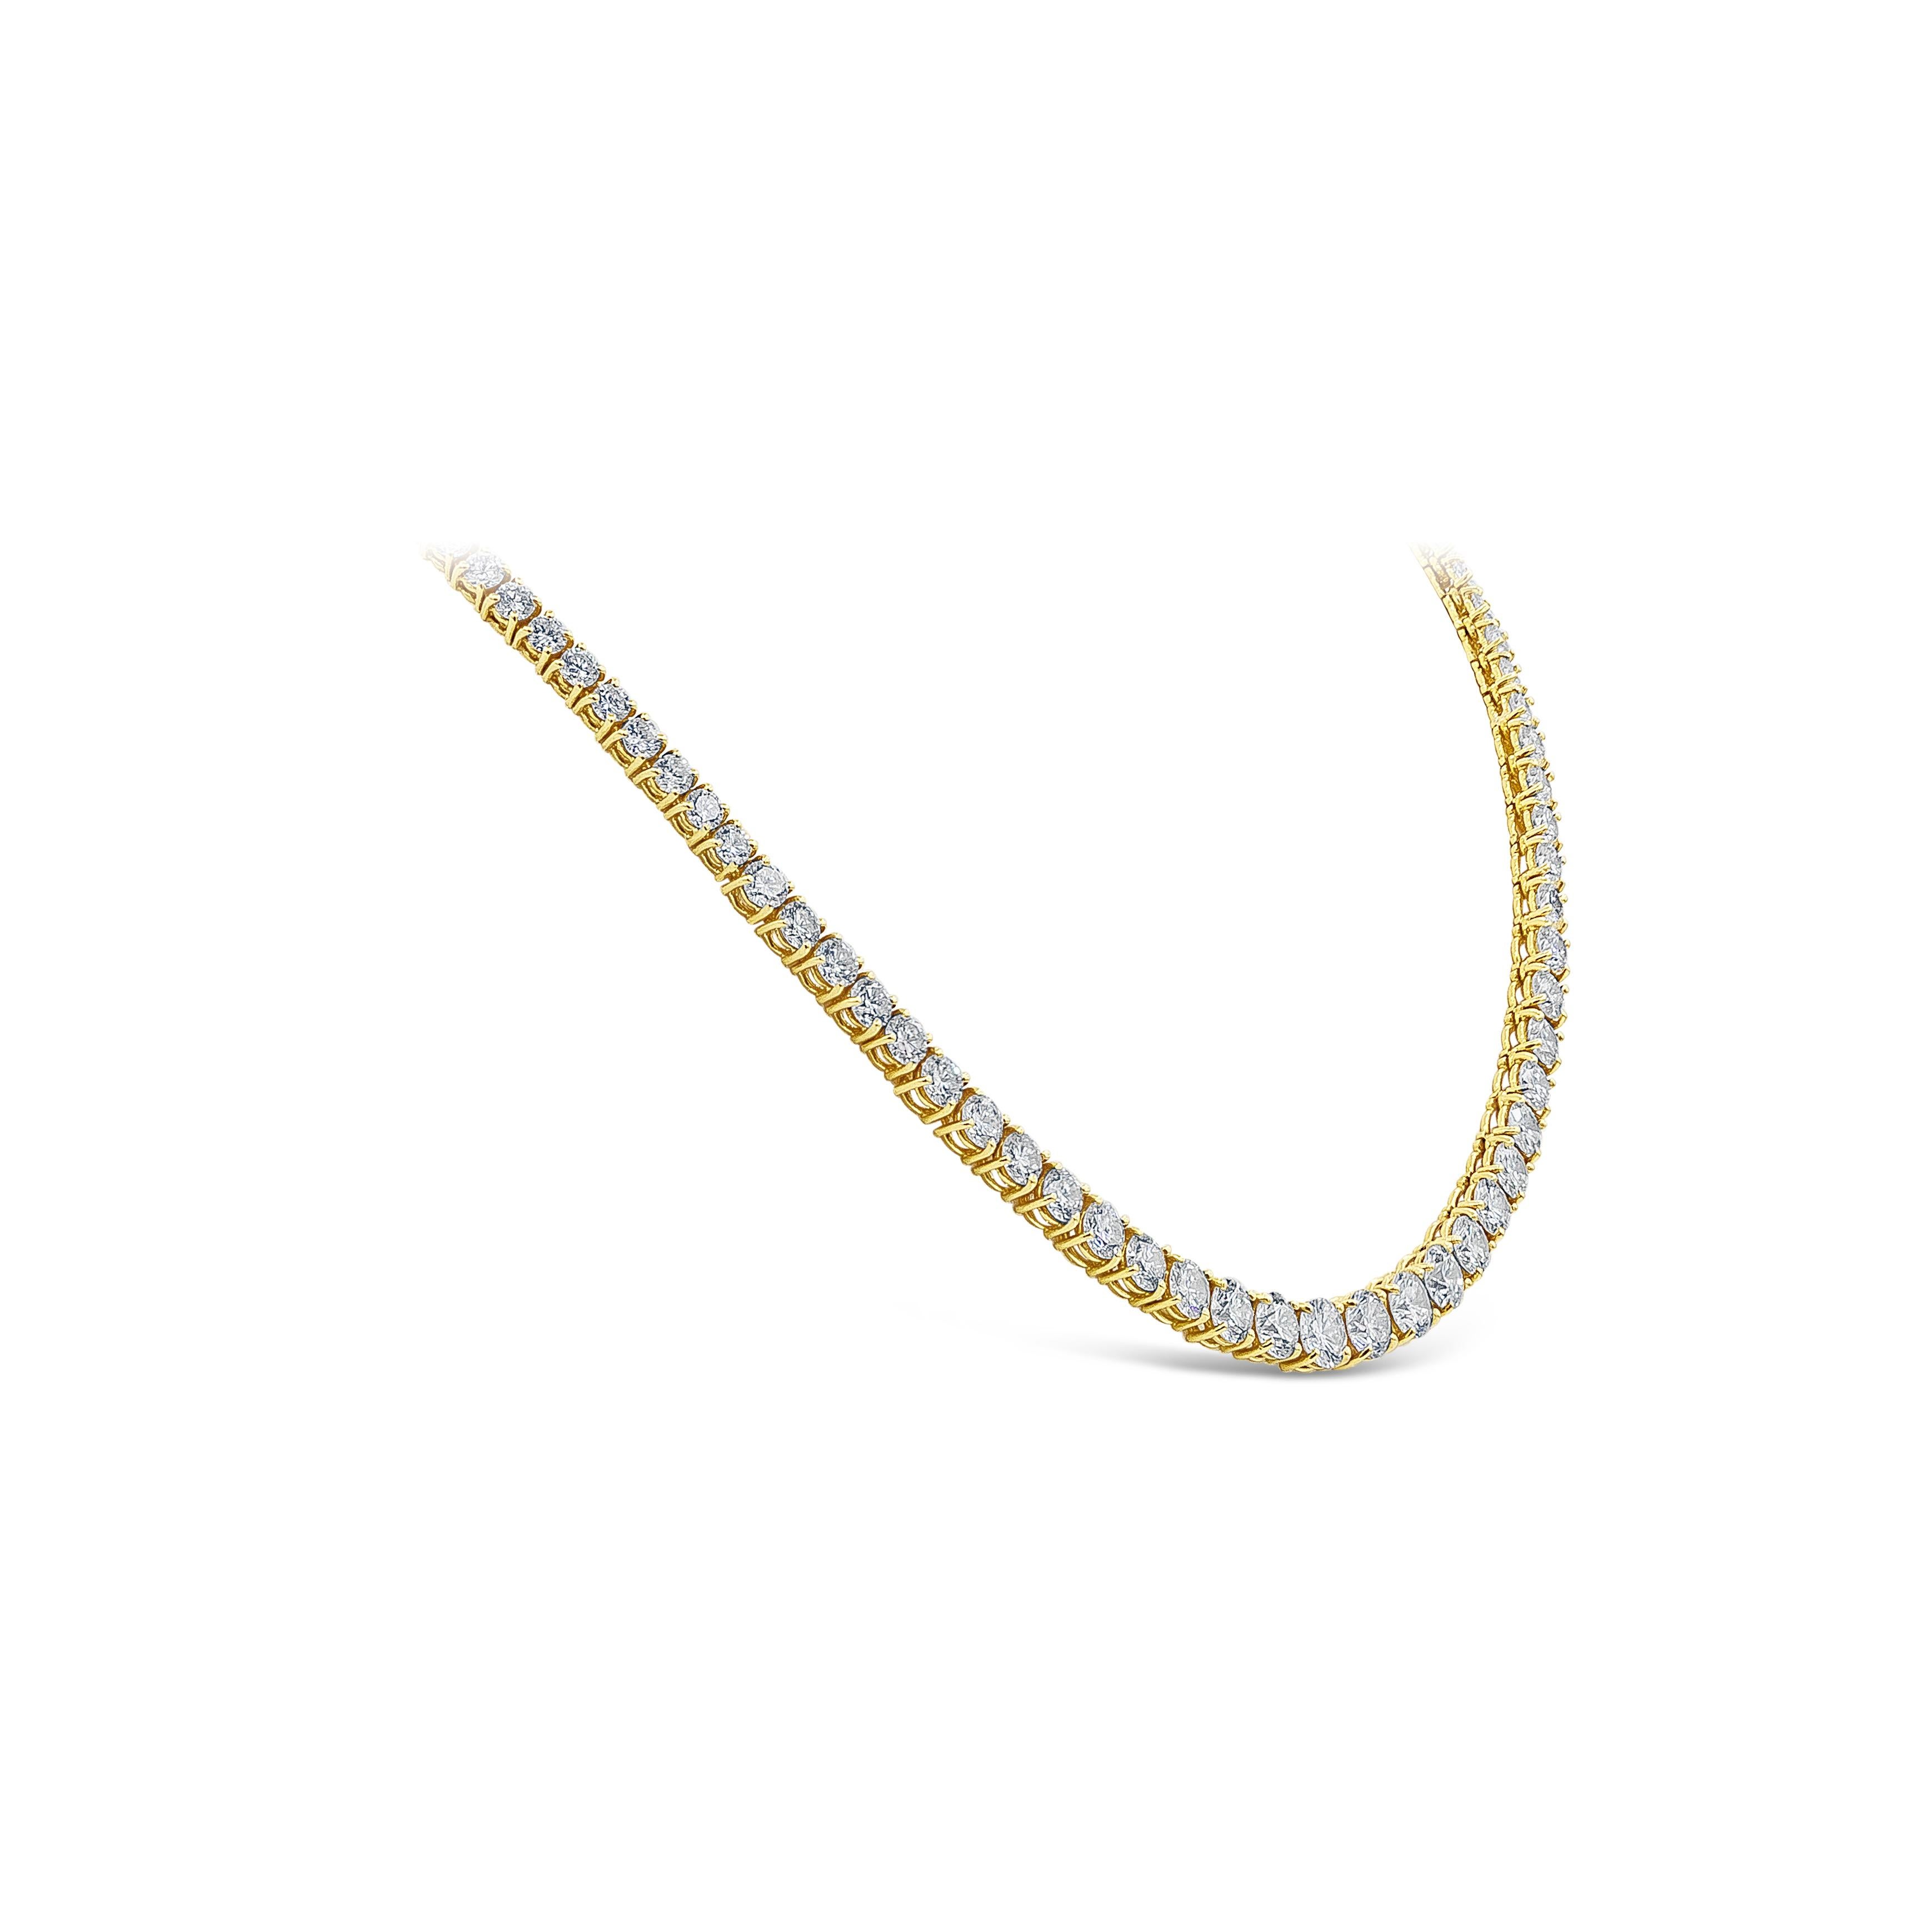 A classic and timeless piece of jewelry showcasing a row of graduating round brilliant diamonds weighing 20.47 carats total, set in a polished 18k yellow gold mounting. Length 16 inches. 

Roman Malakov is a custom house, specializing in creating